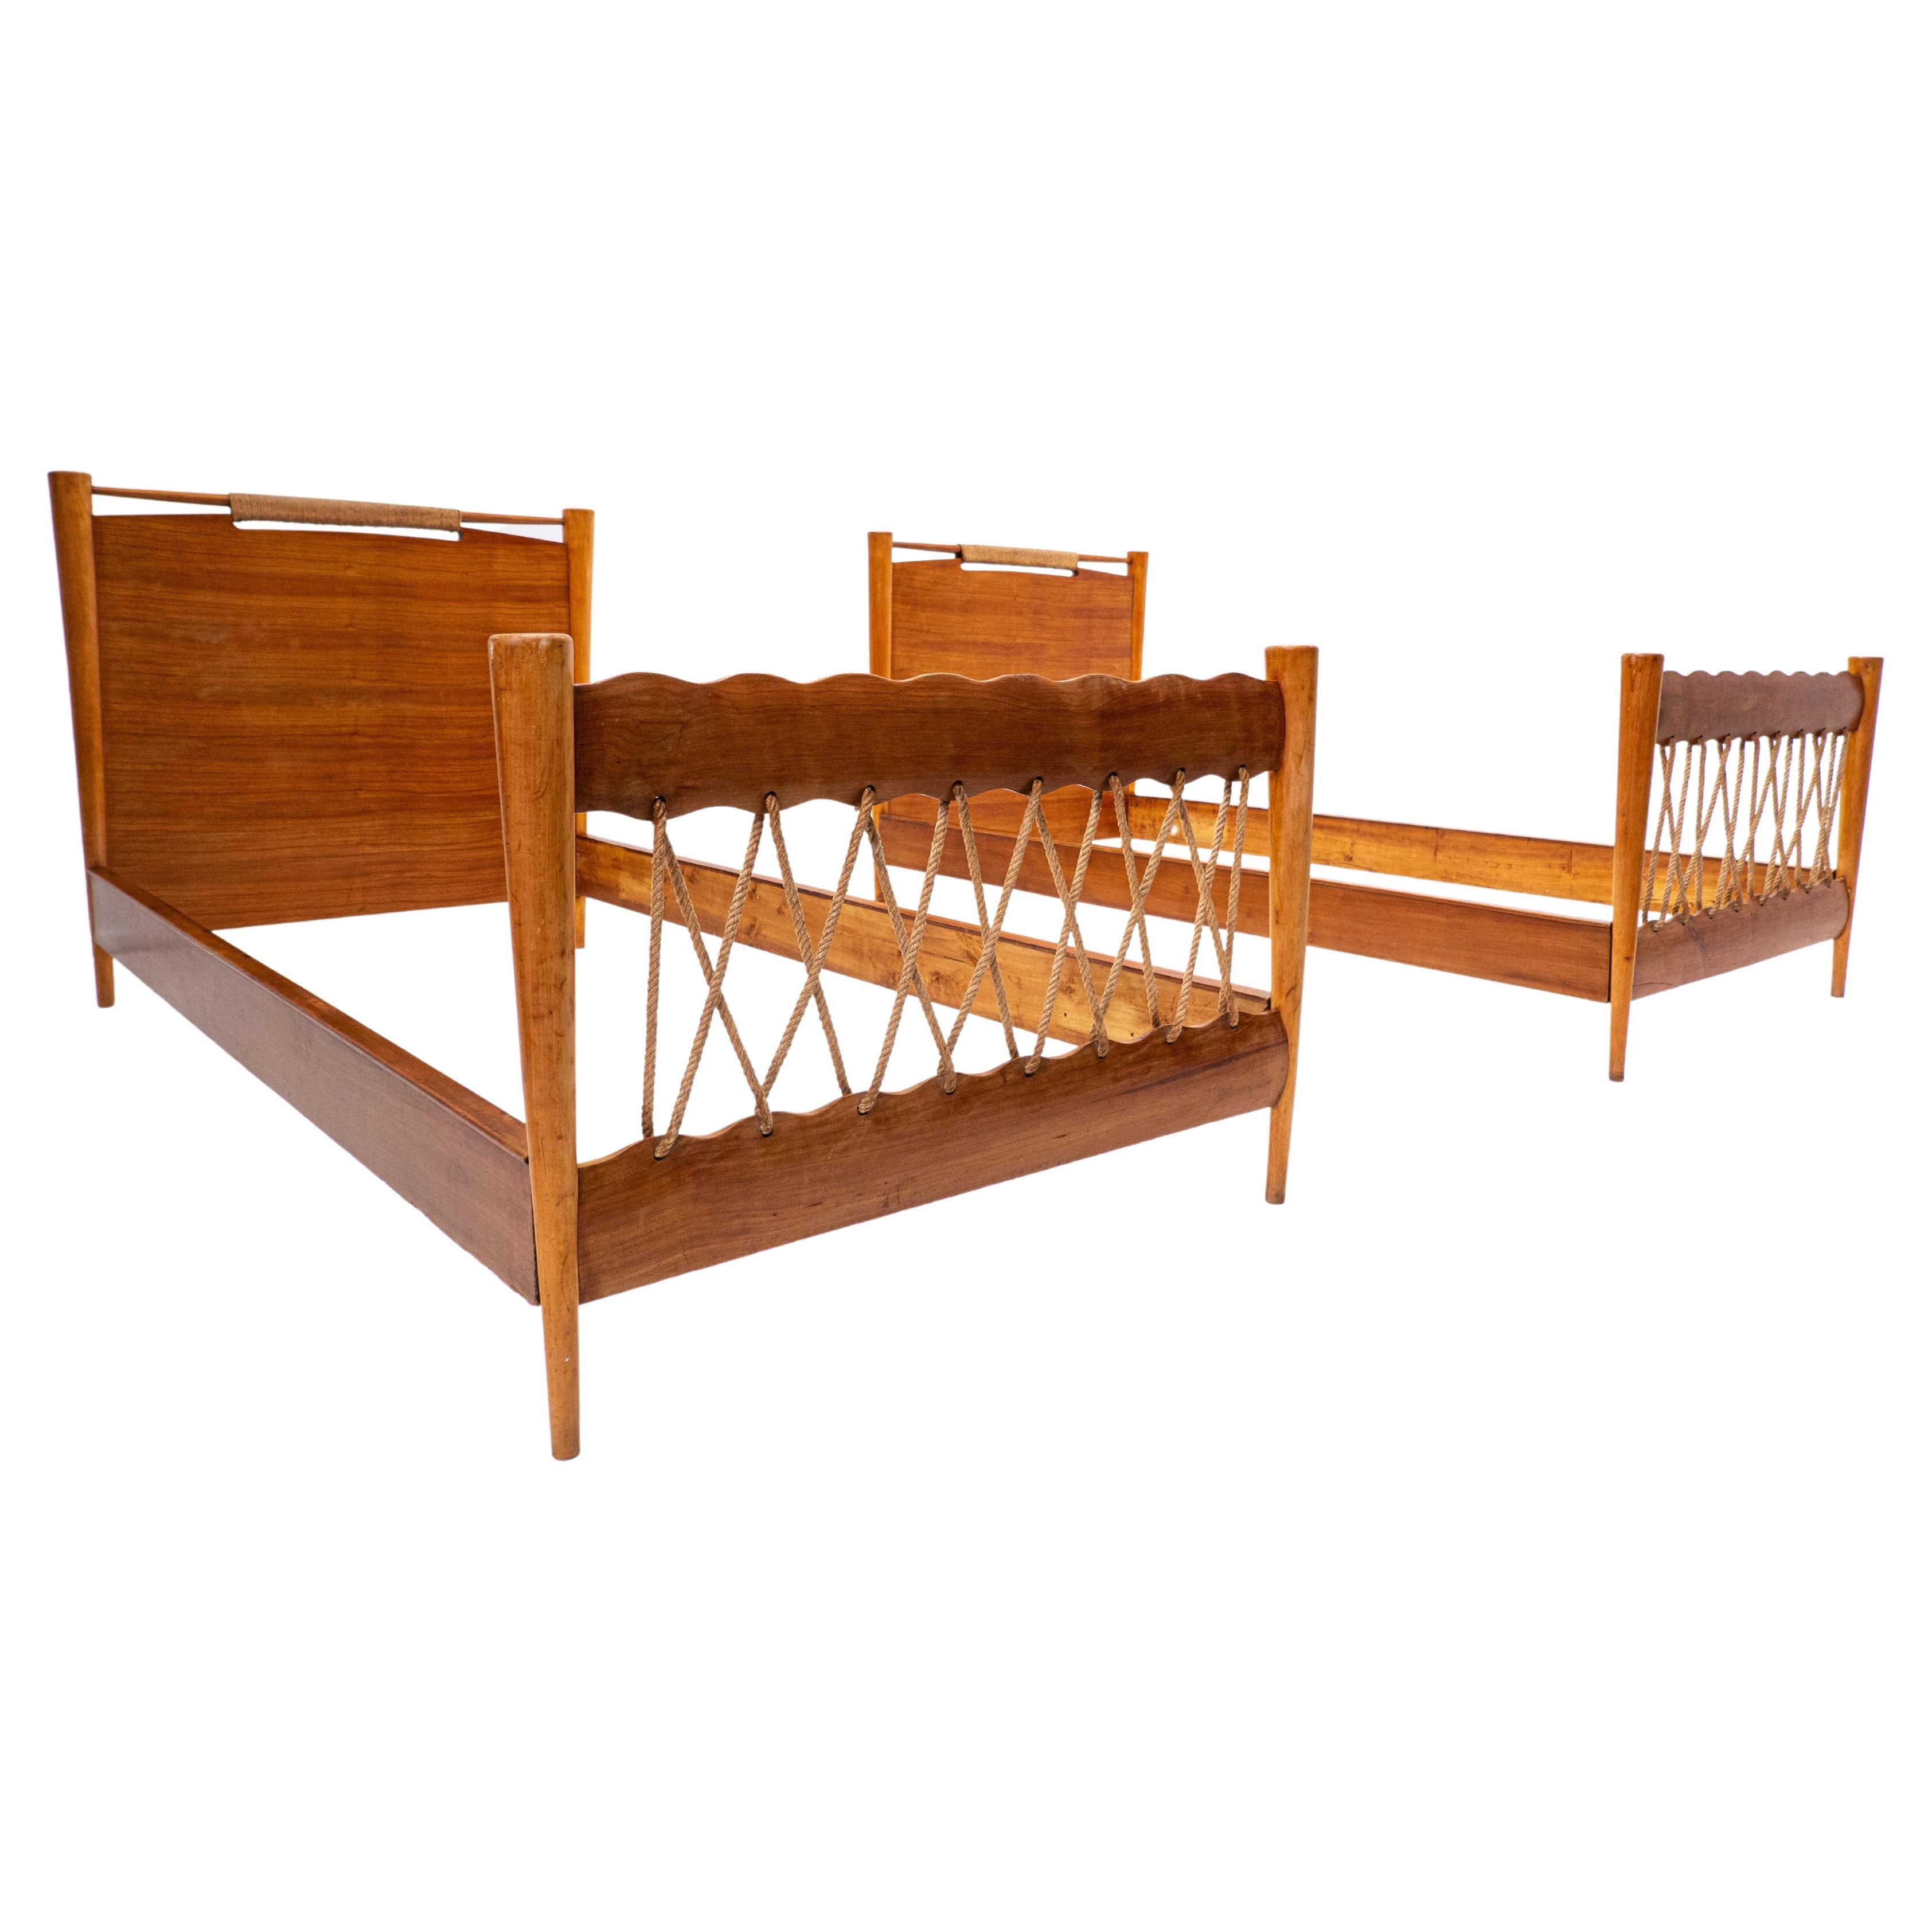 Pair of Beds Attributed to Guglielmo Pecorini, Cherry Wood, Italy, 1940s For Sale